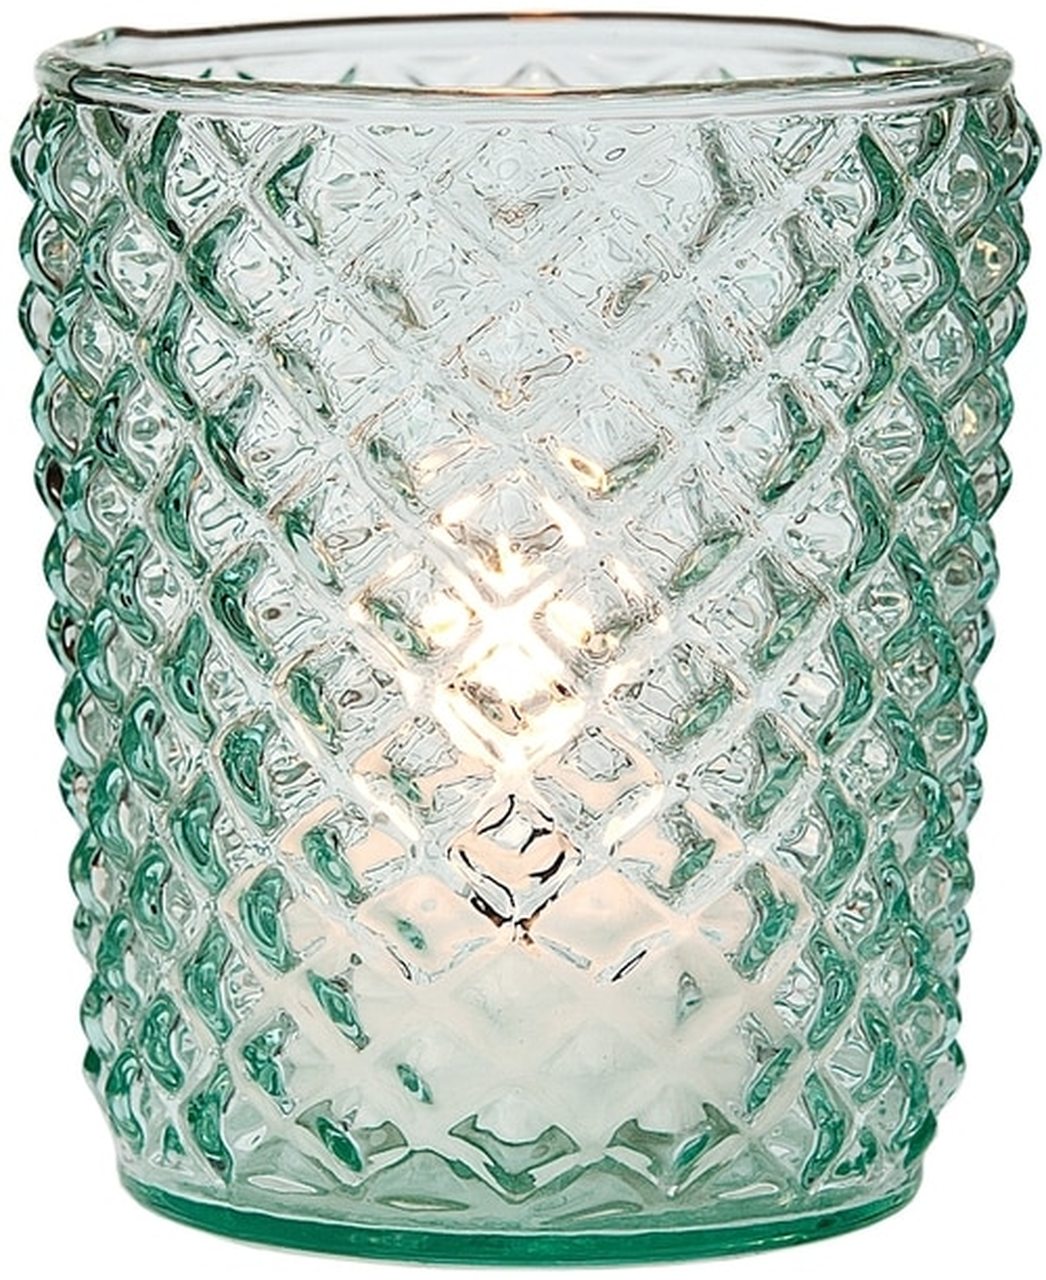 Vintage Glass Candle Holder (3-Inch, Zariah Design, Vintage Green) - For Use with Tea Lights - For Home Decor, Parties, and Wedding Decorations - Luna Bazaar | Boho &amp; Vintage Style Decor